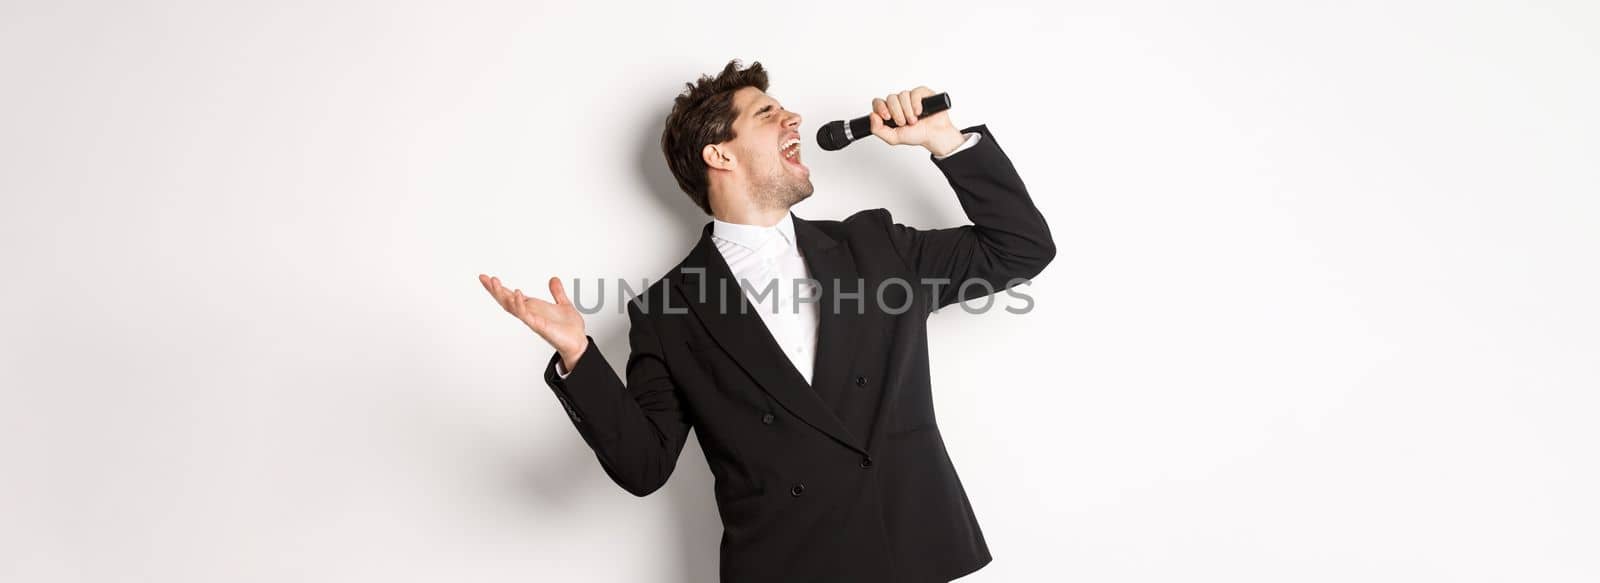 Portrait of handsome man singing a song with passion, standing in black suit, holding microphone and performning, posing over white background by Benzoix